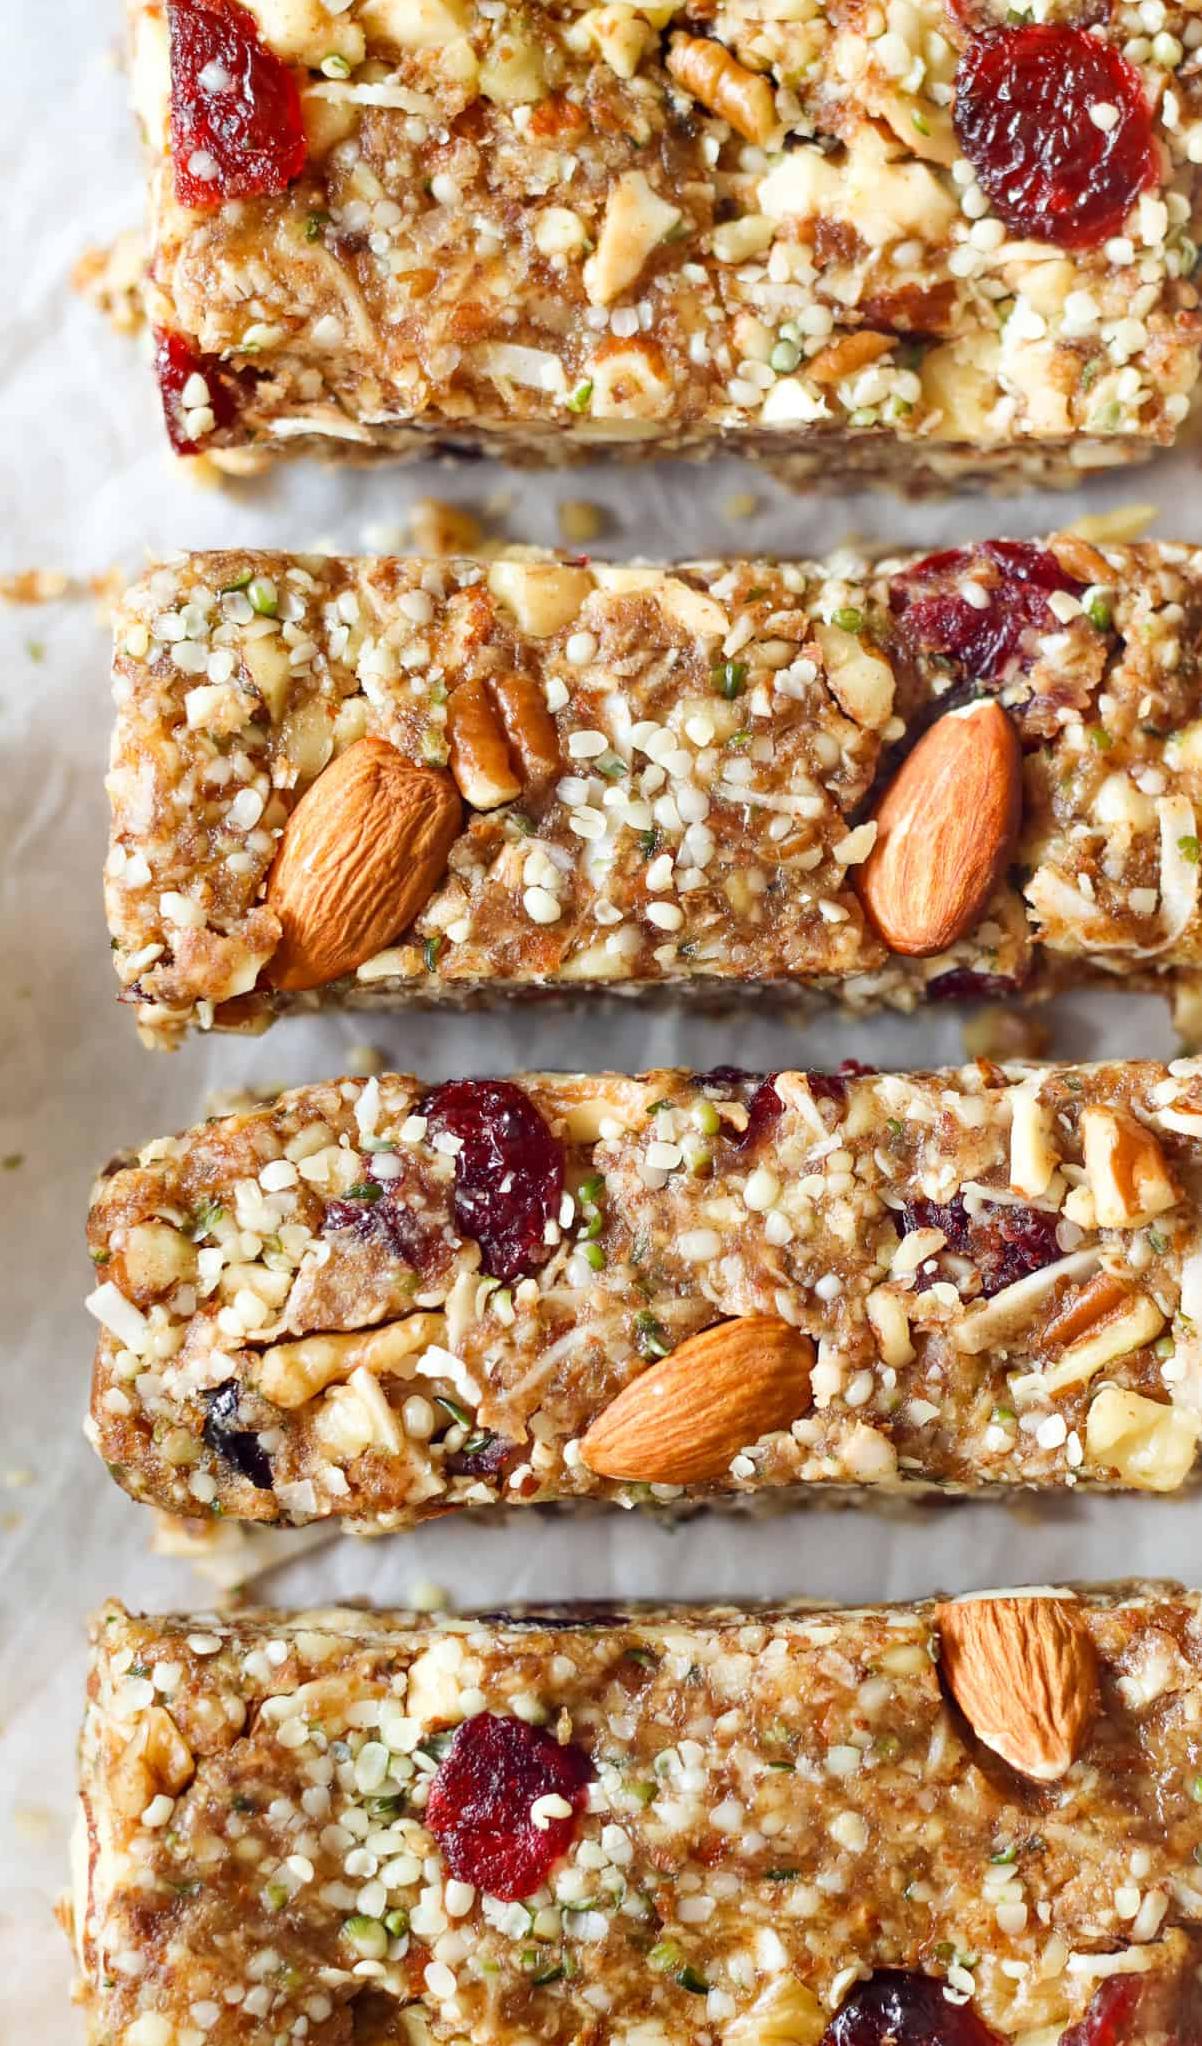  Better than store-bought, these bars are homemade with care.